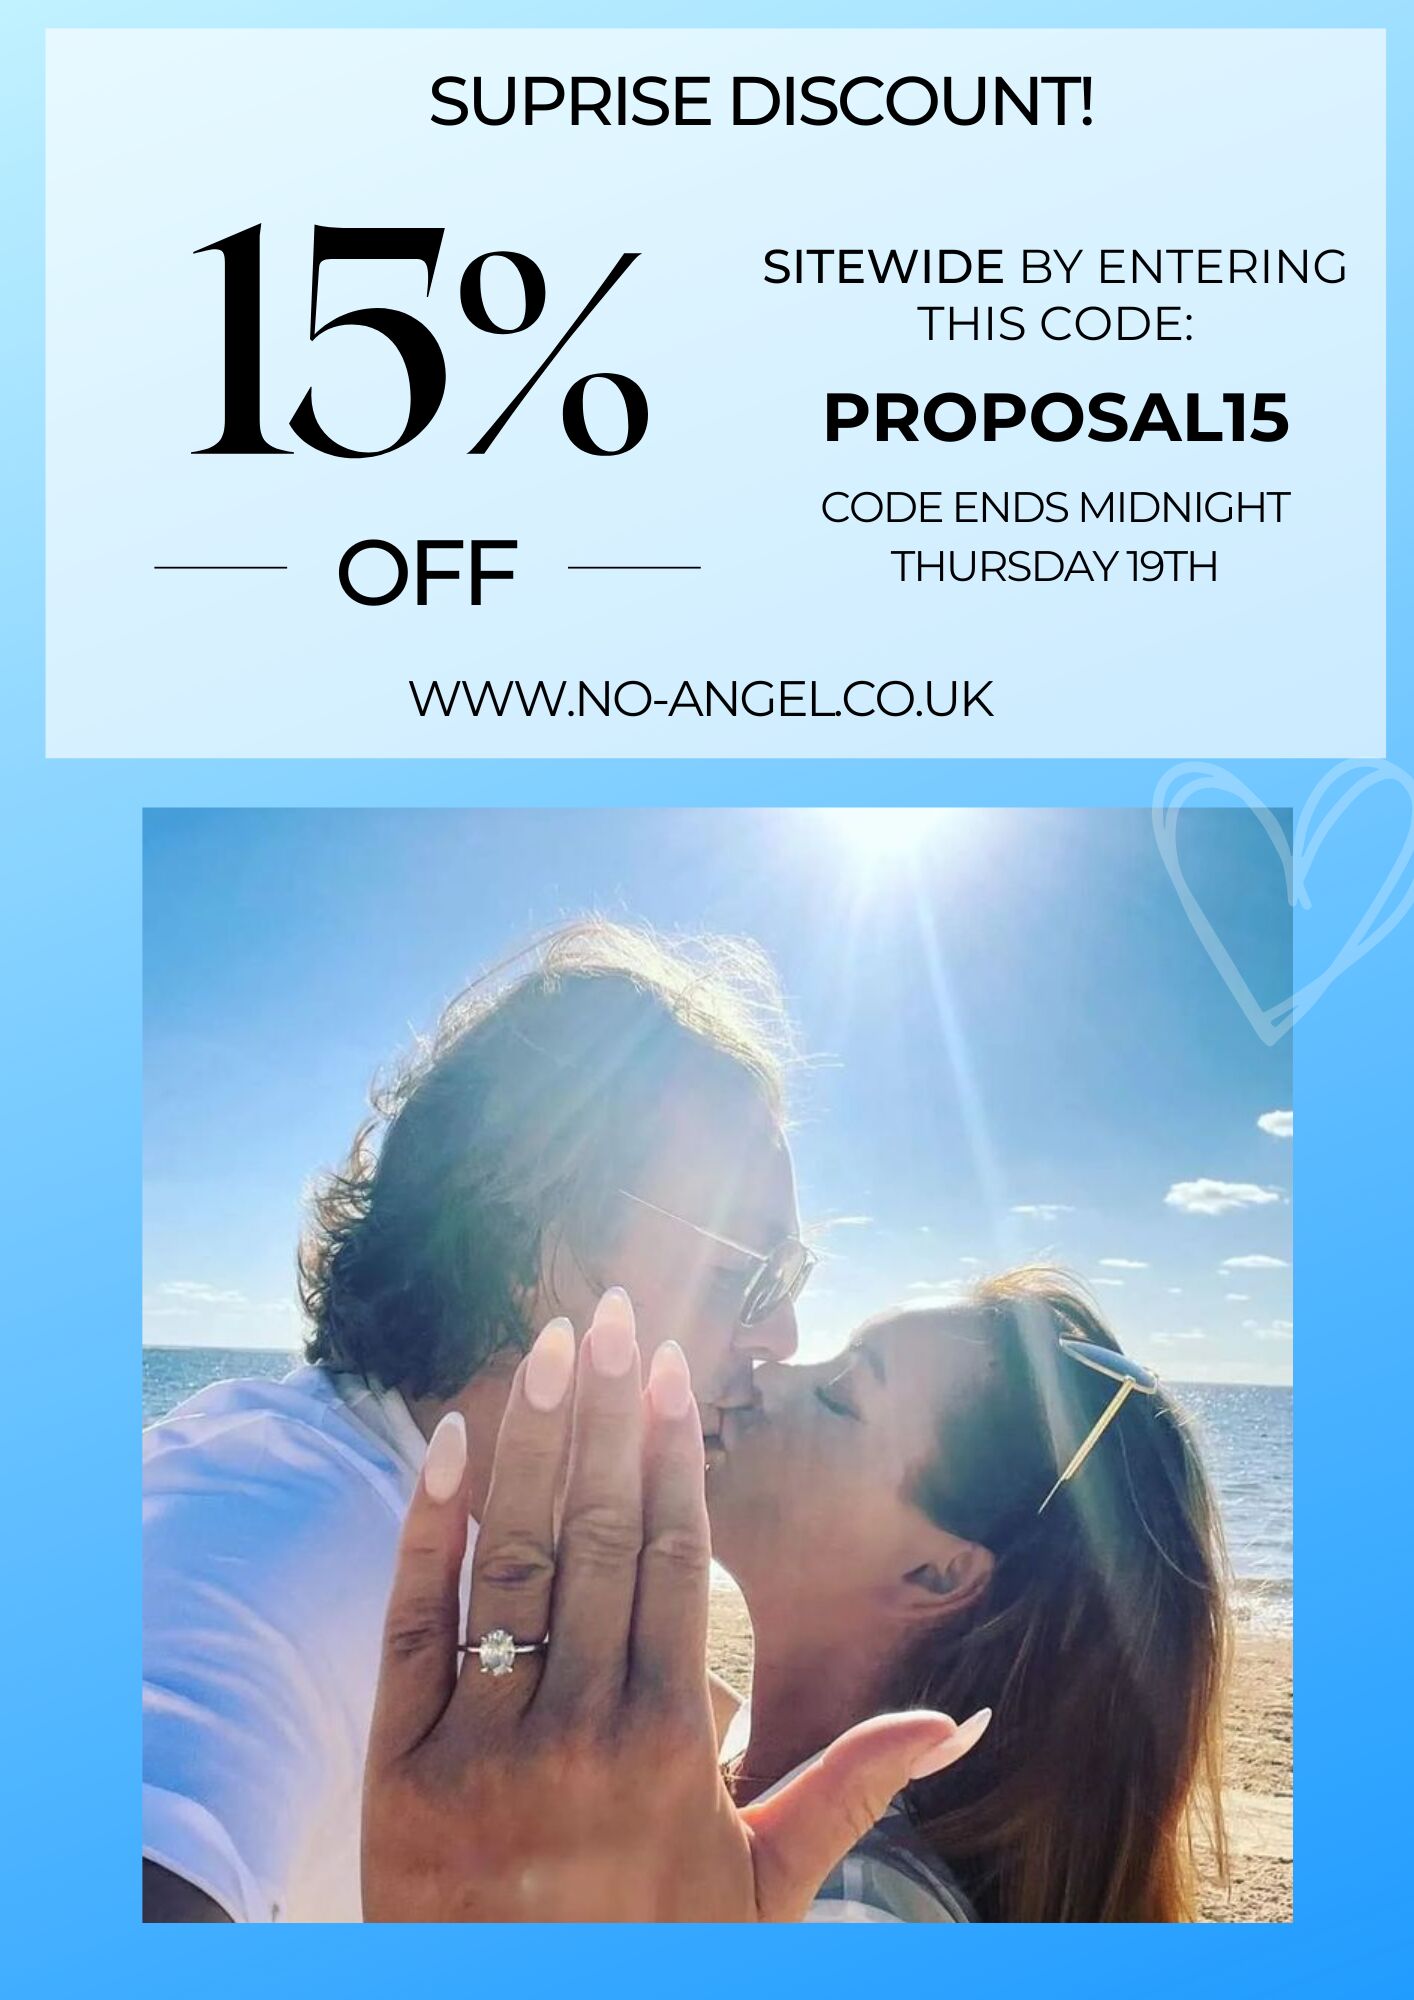 SUPRISE DISCOUNT! 0 SITEWIDE BY ENTERING THIS CODE: 0 PROPOSALI5 CODE ENDS MIDNIGHT OFF S THURSDAY 19TH WWW.NO-ANGELCO.UK 